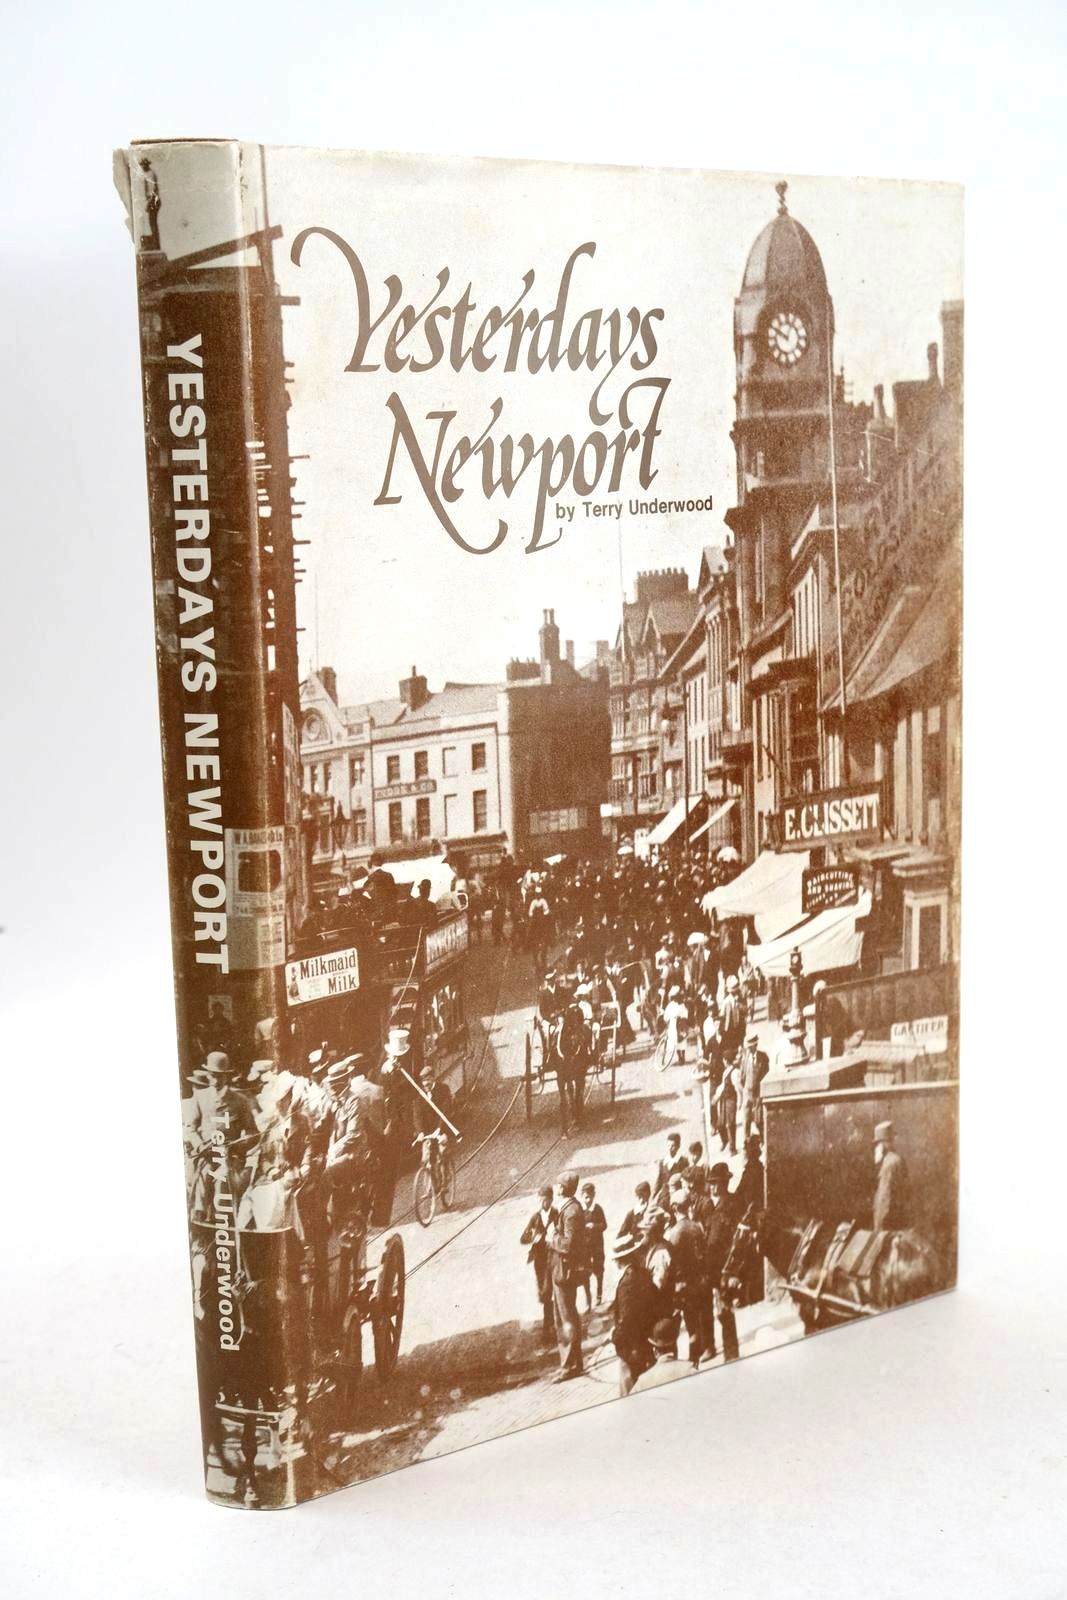 Photo of YESTERDAYS NEWPORT written by Underwood, Terry published by Terry Underwood (STOCK CODE: 1326392)  for sale by Stella & Rose's Books